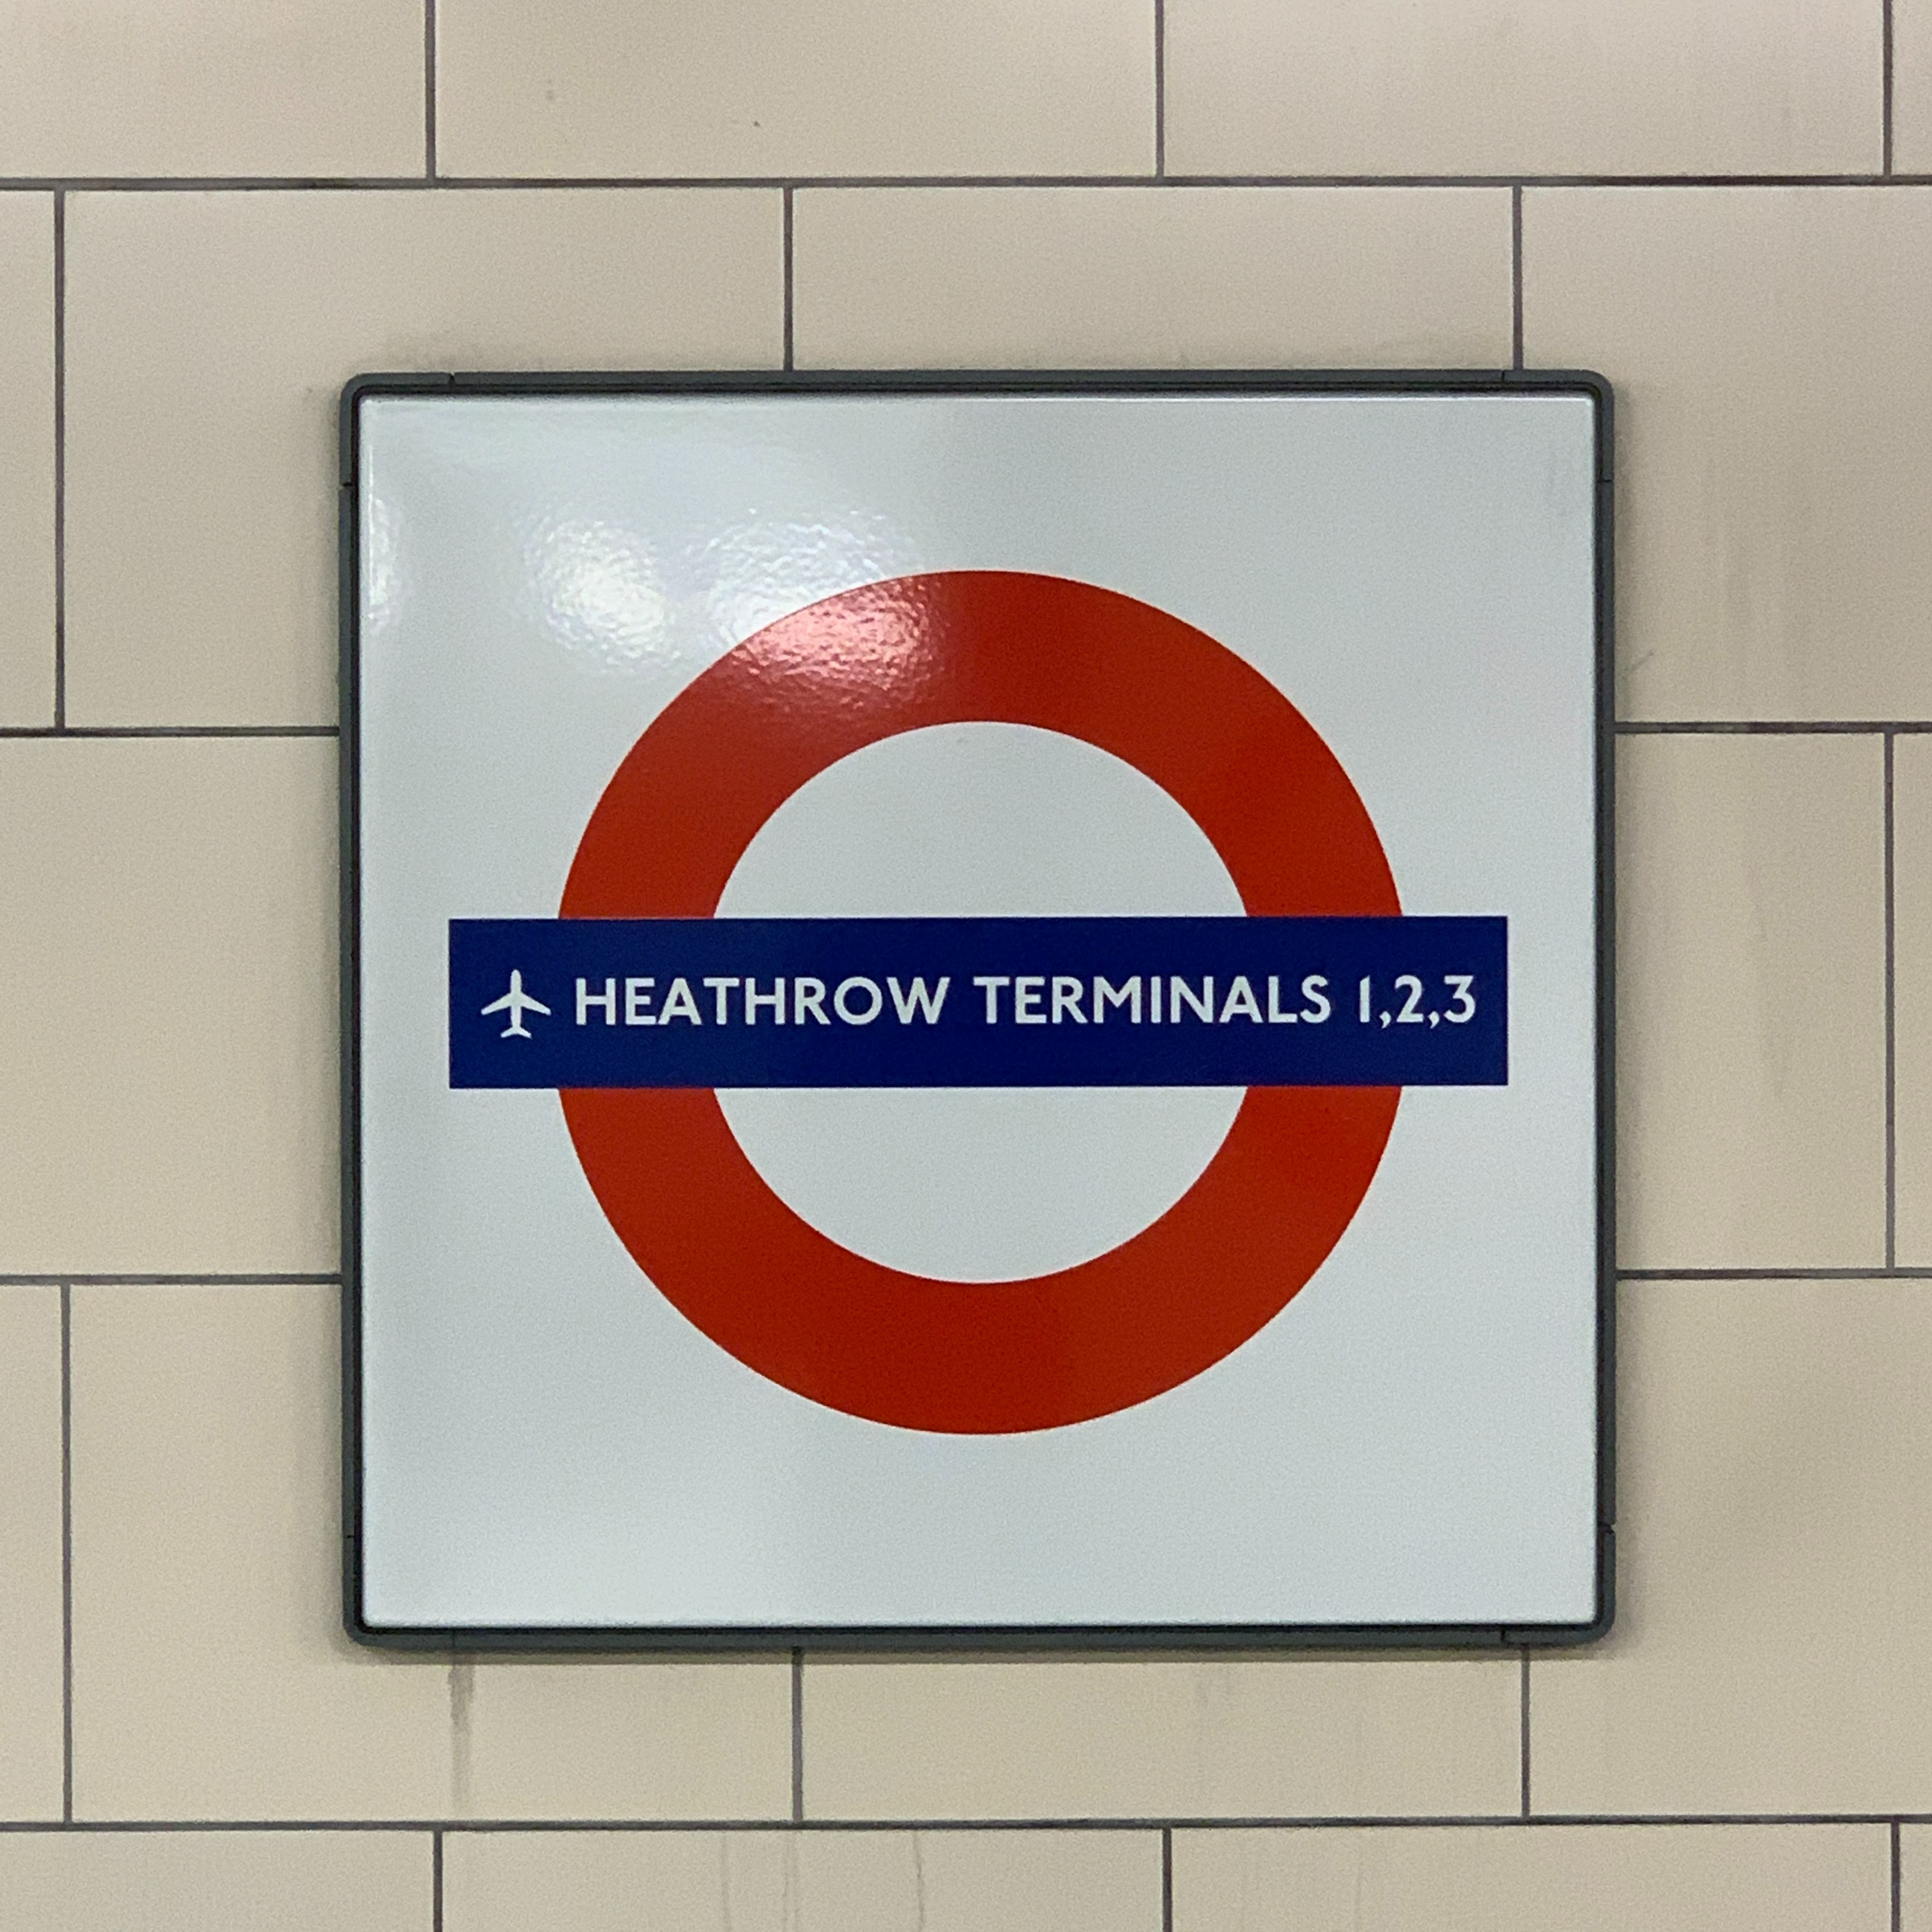 how to get from London city airport to Heathrow